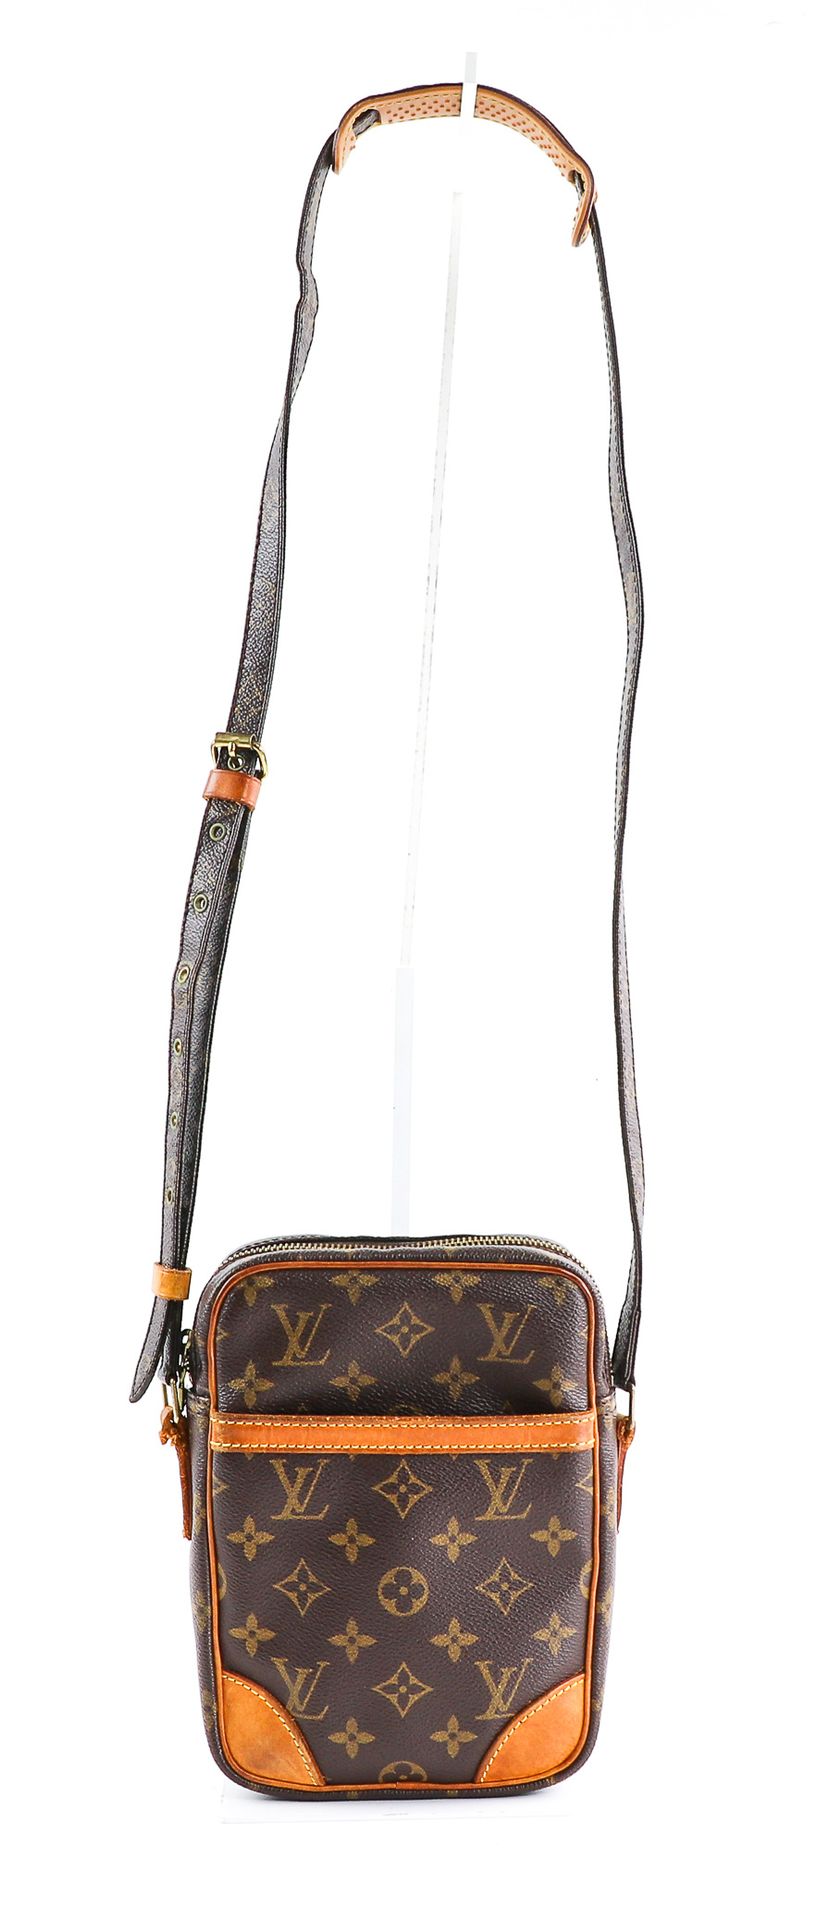 Null Louis VUITTON - "Danube" clutch bag in monogrammed canvas and natural leath&hellip;